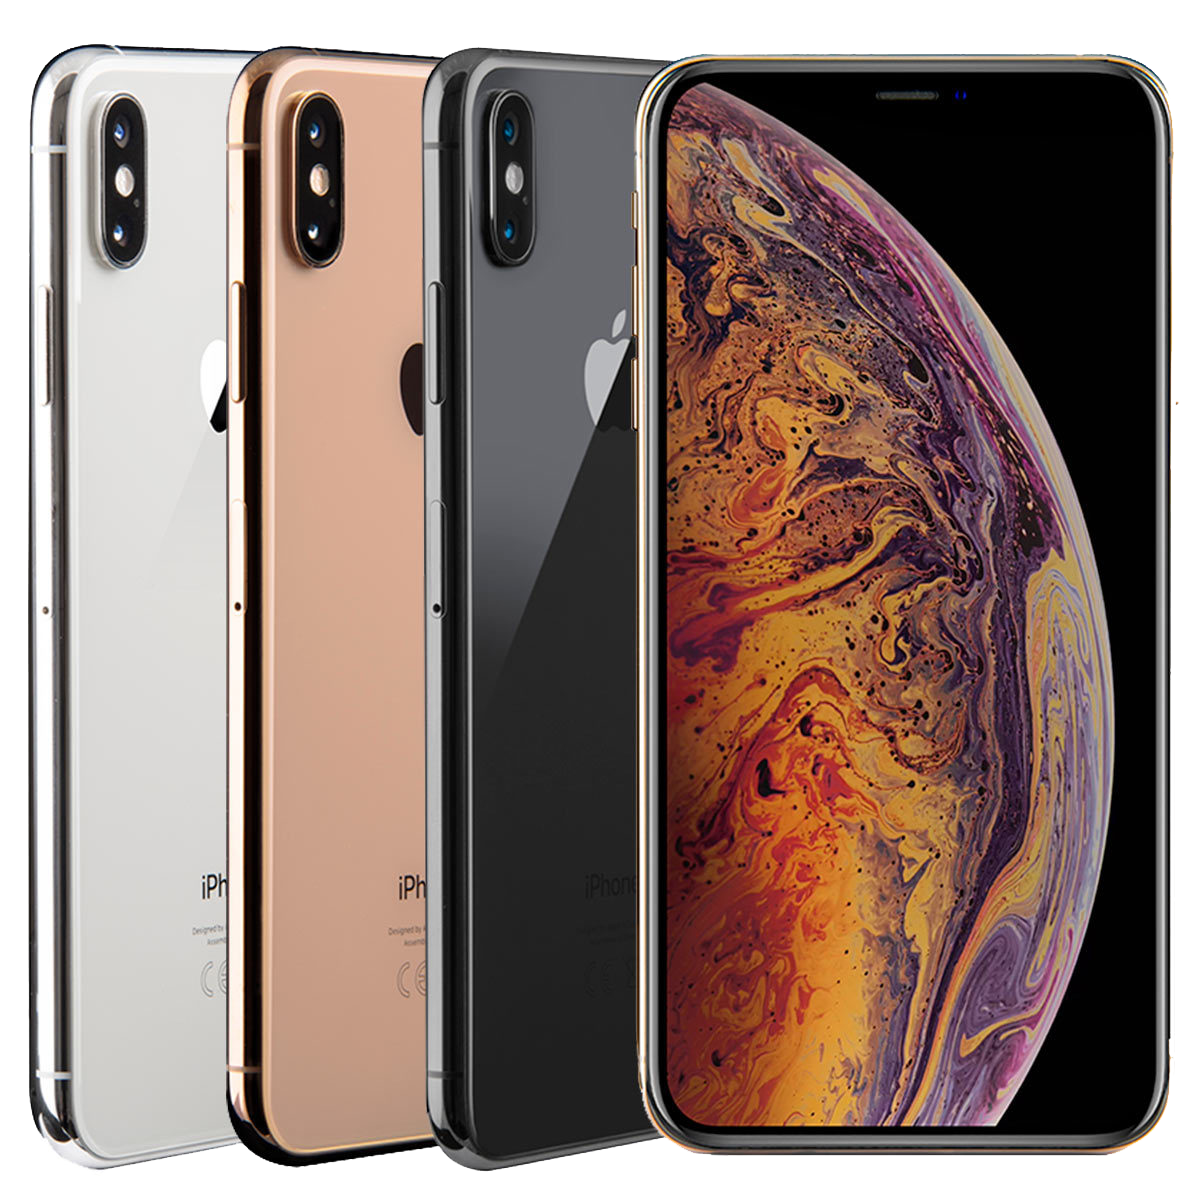 Apple iPhone XS Max 6.5" | A1921 A2101 | Unlocked | New Parts Message